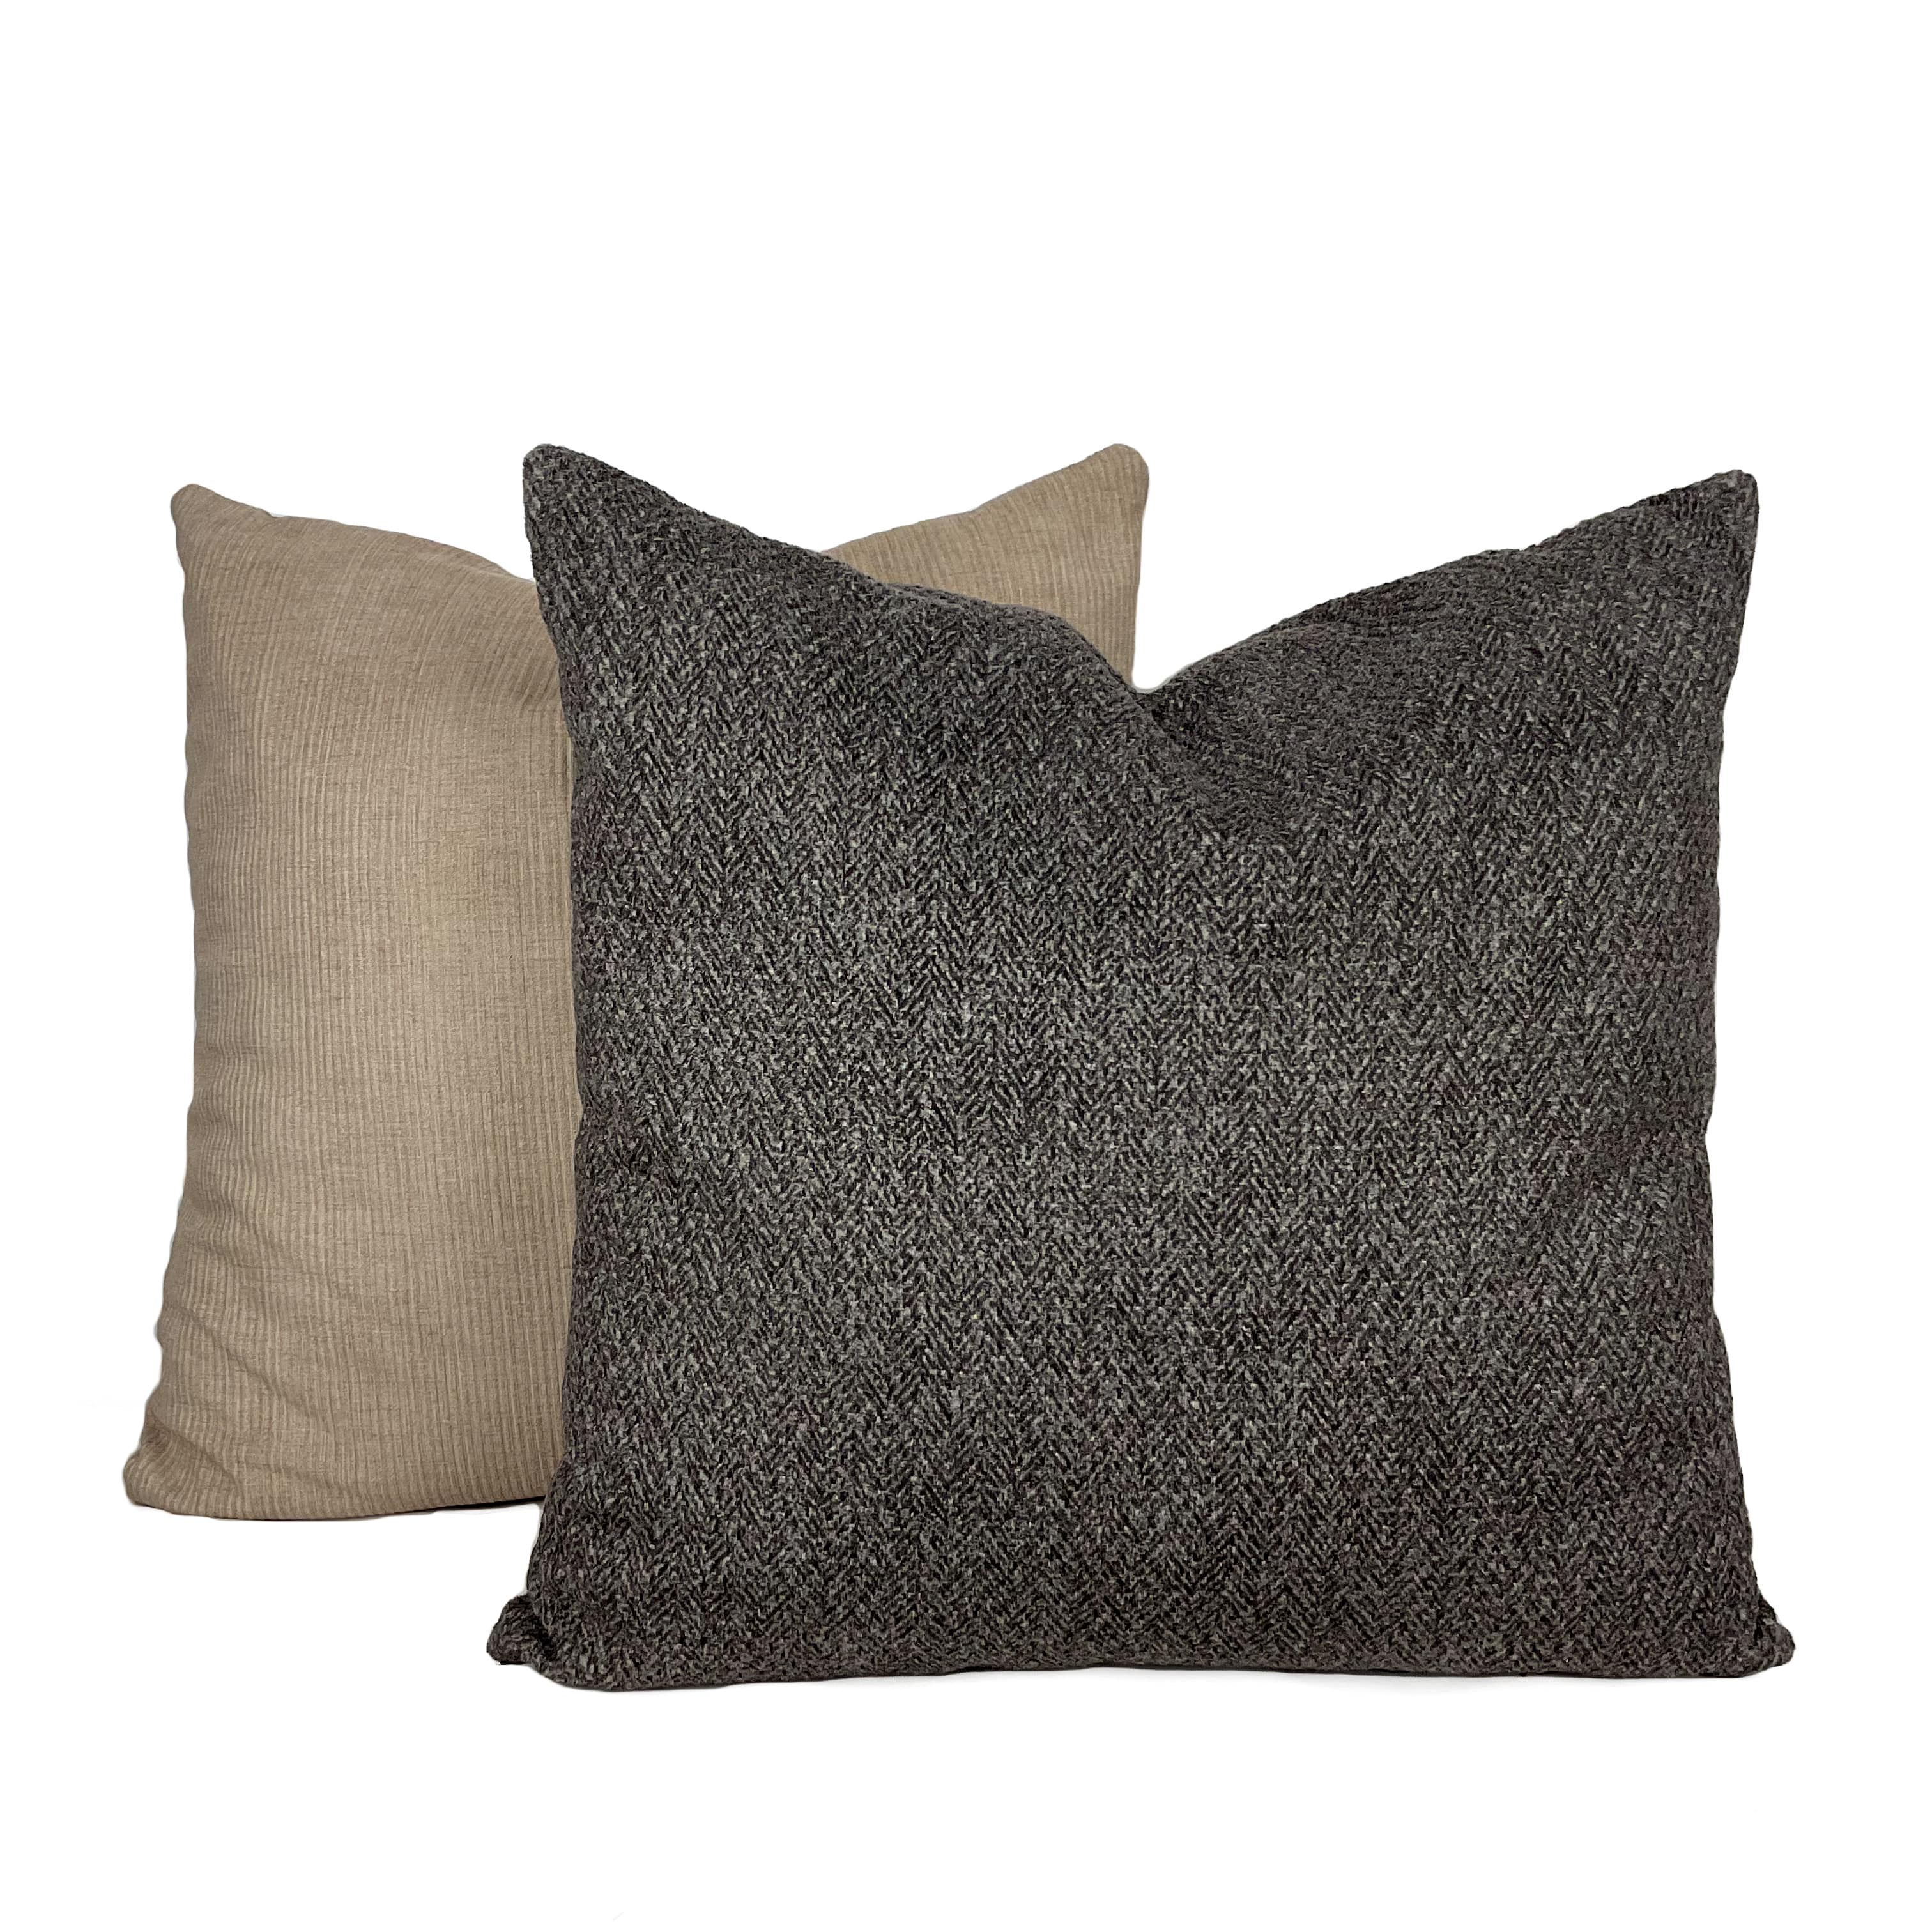 A slate grey plain suede cushion placed against a white background